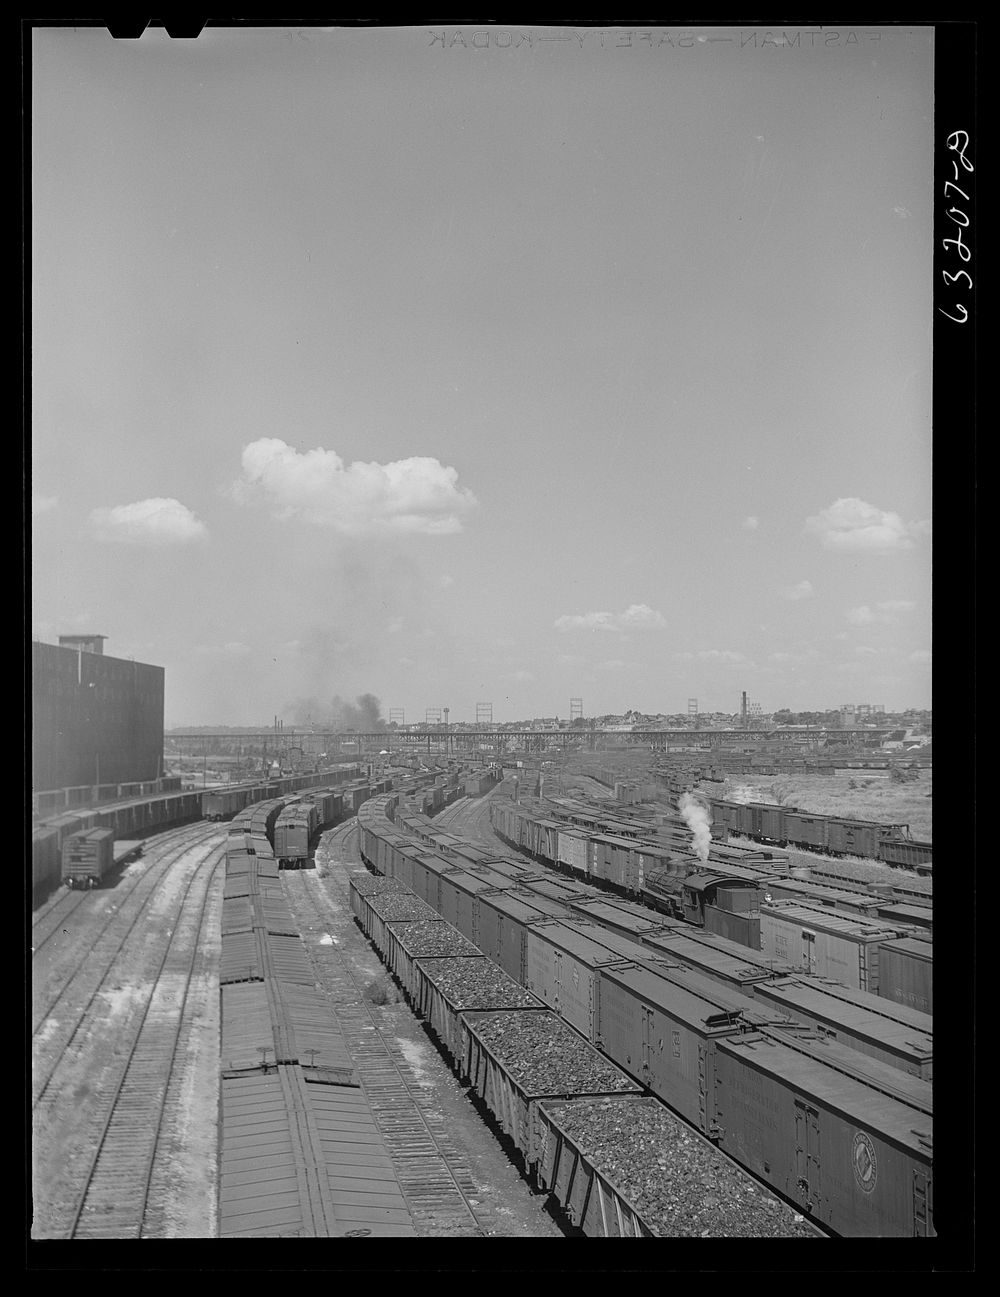 [Untitled photo, possibly related to: Railroad yards. Milwaukee, Wisconsin]. Sourced from the Library of Congress.